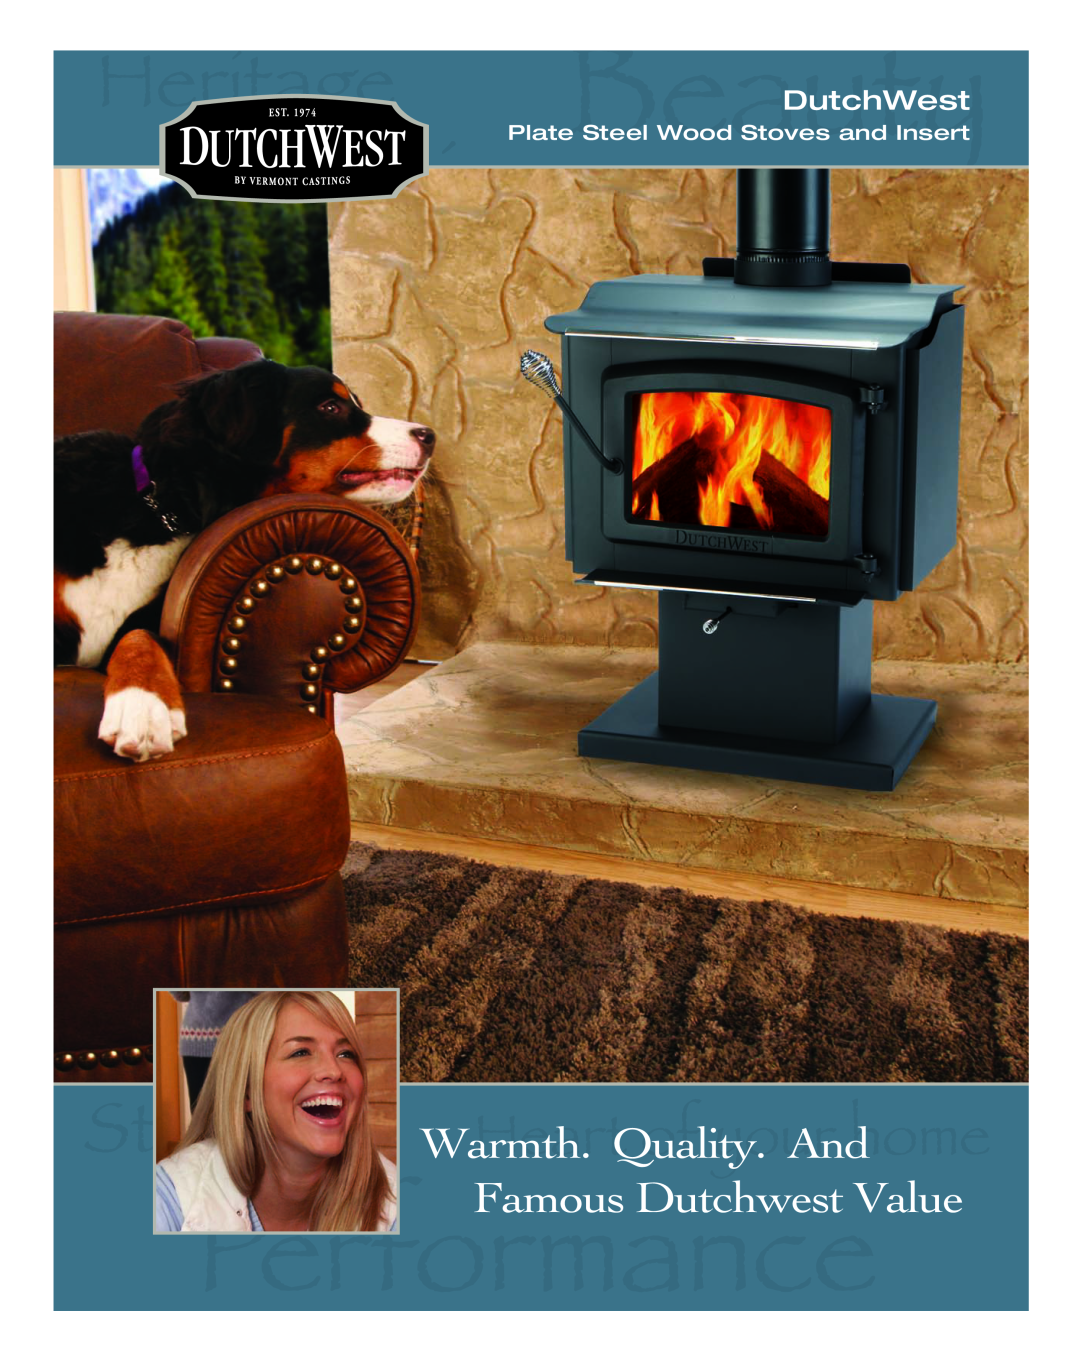 Vermont Casting DW2500X02 manual Warmth. Quality. And FamousDutchwest Value, DutchWest, Plate Steel Wood Stoves and Insert 